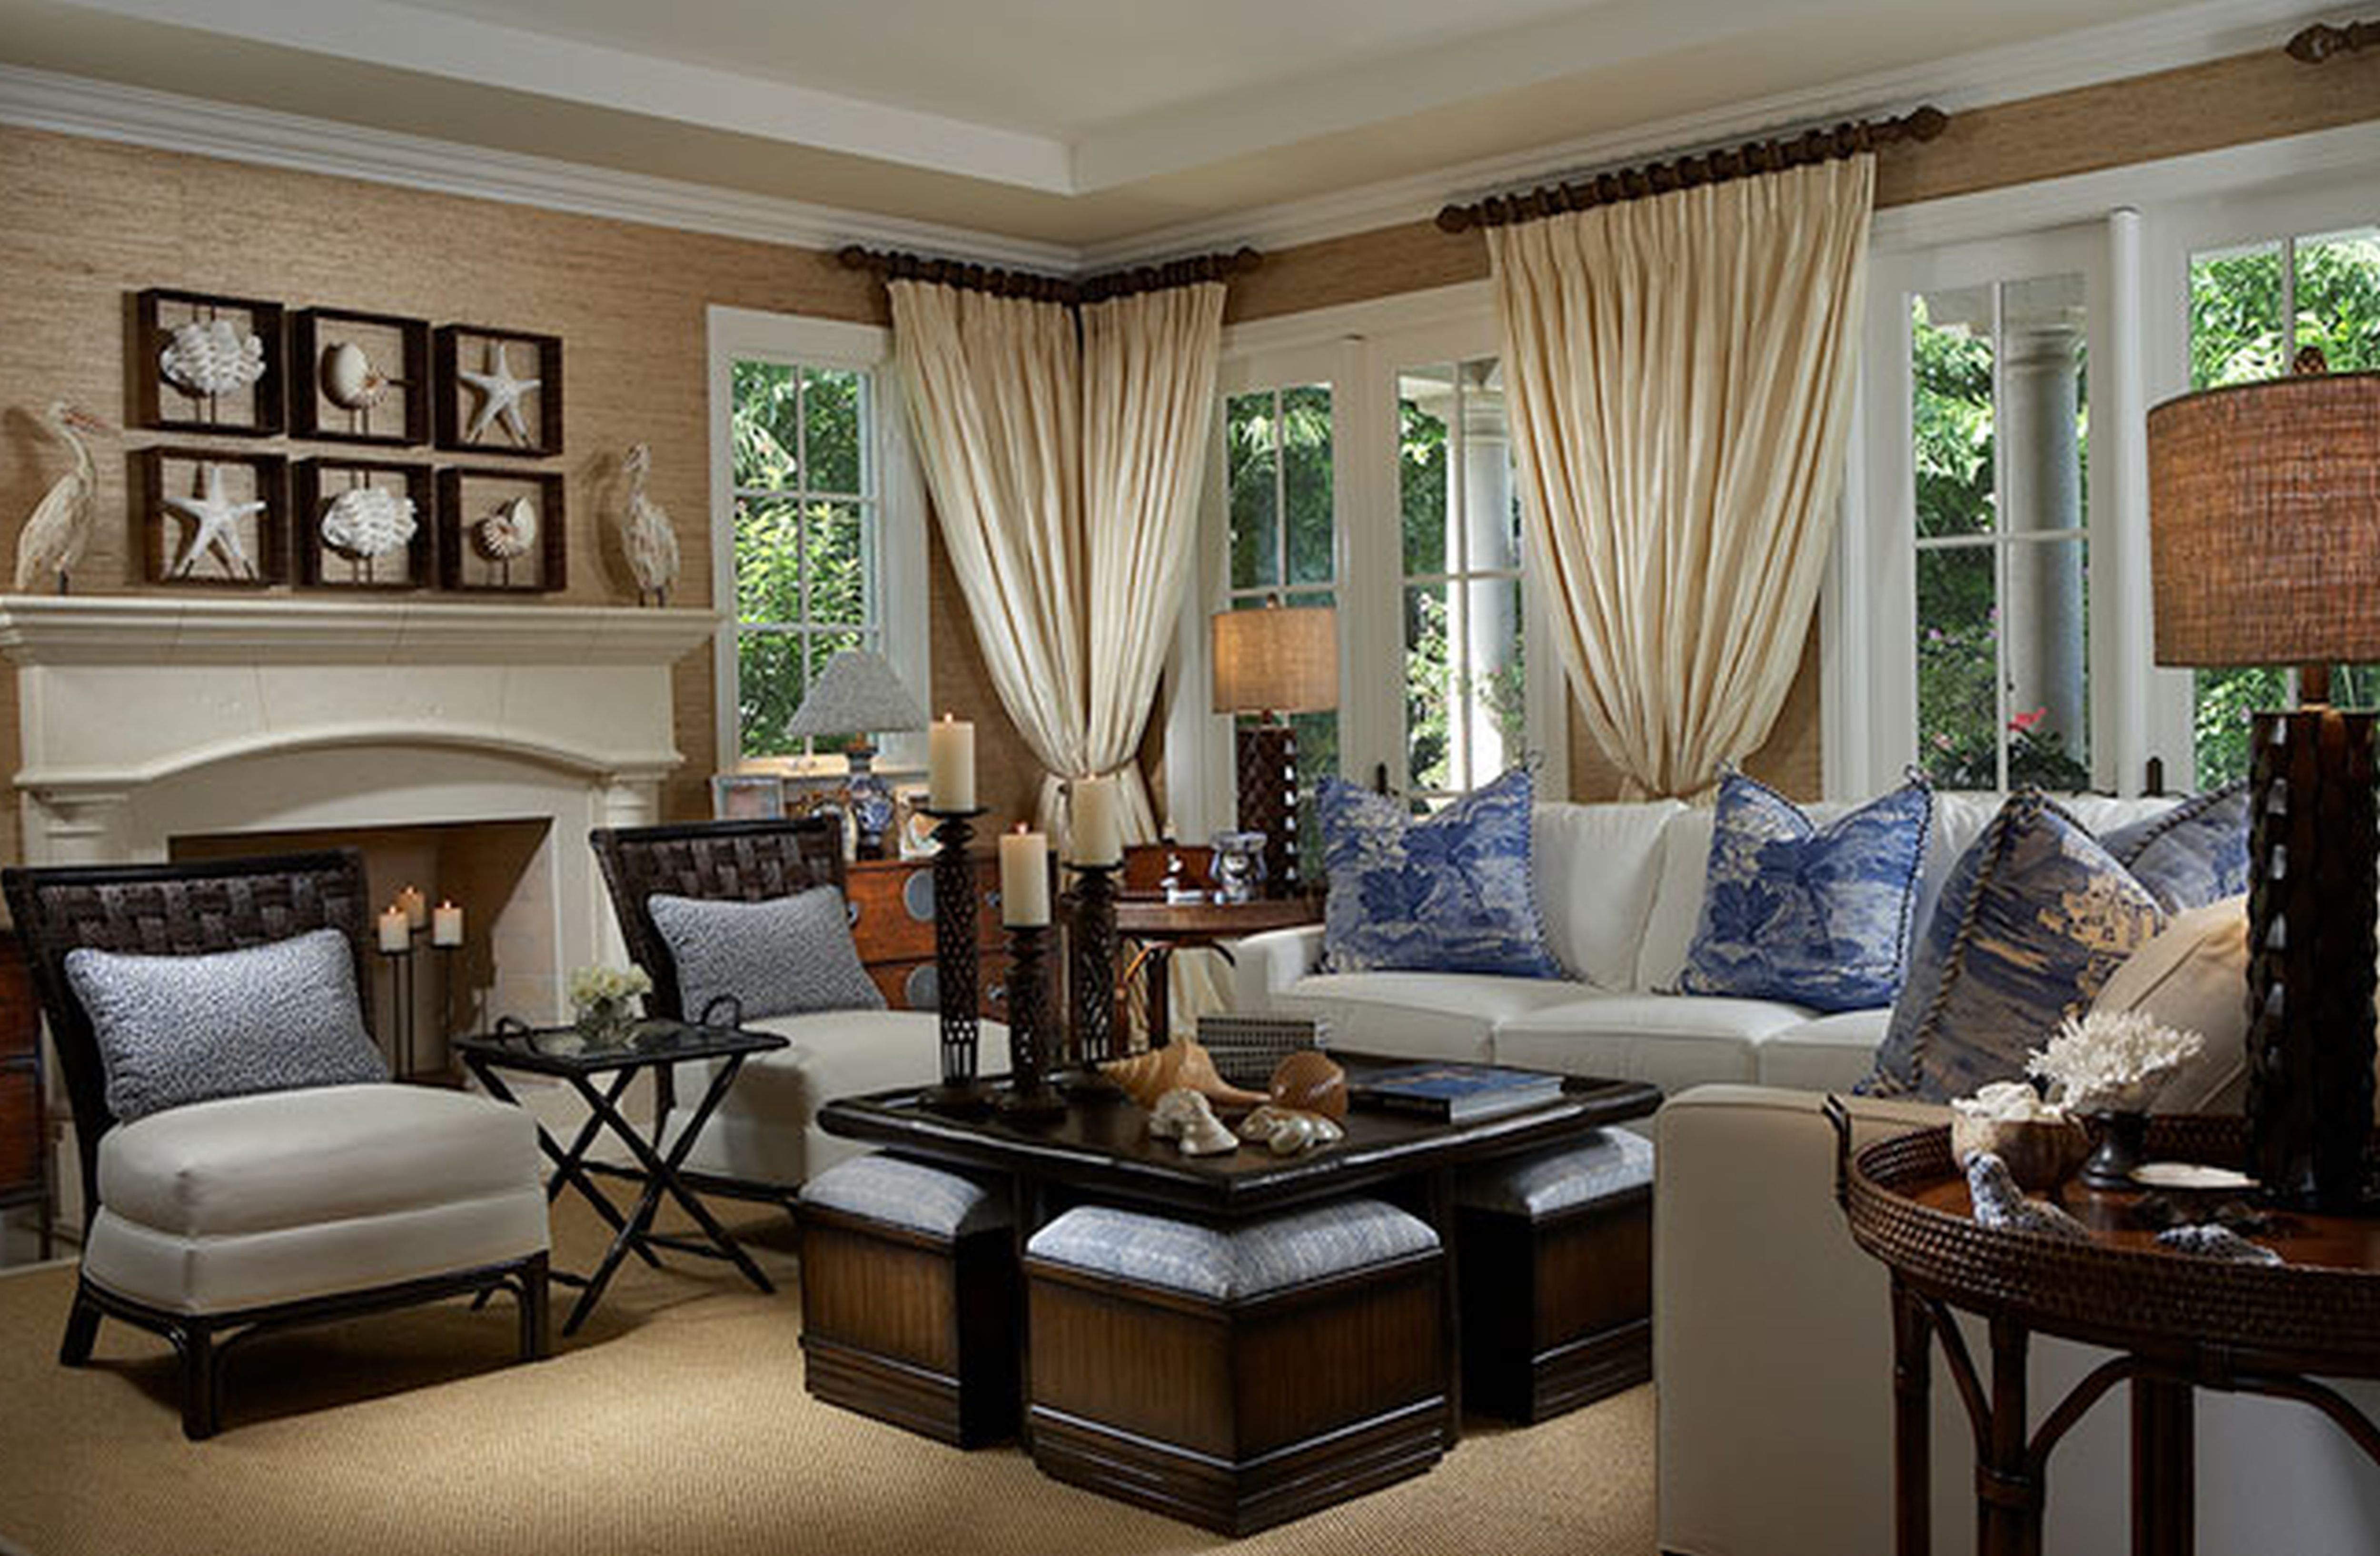 Countrystyle Living Room Design photo - 6